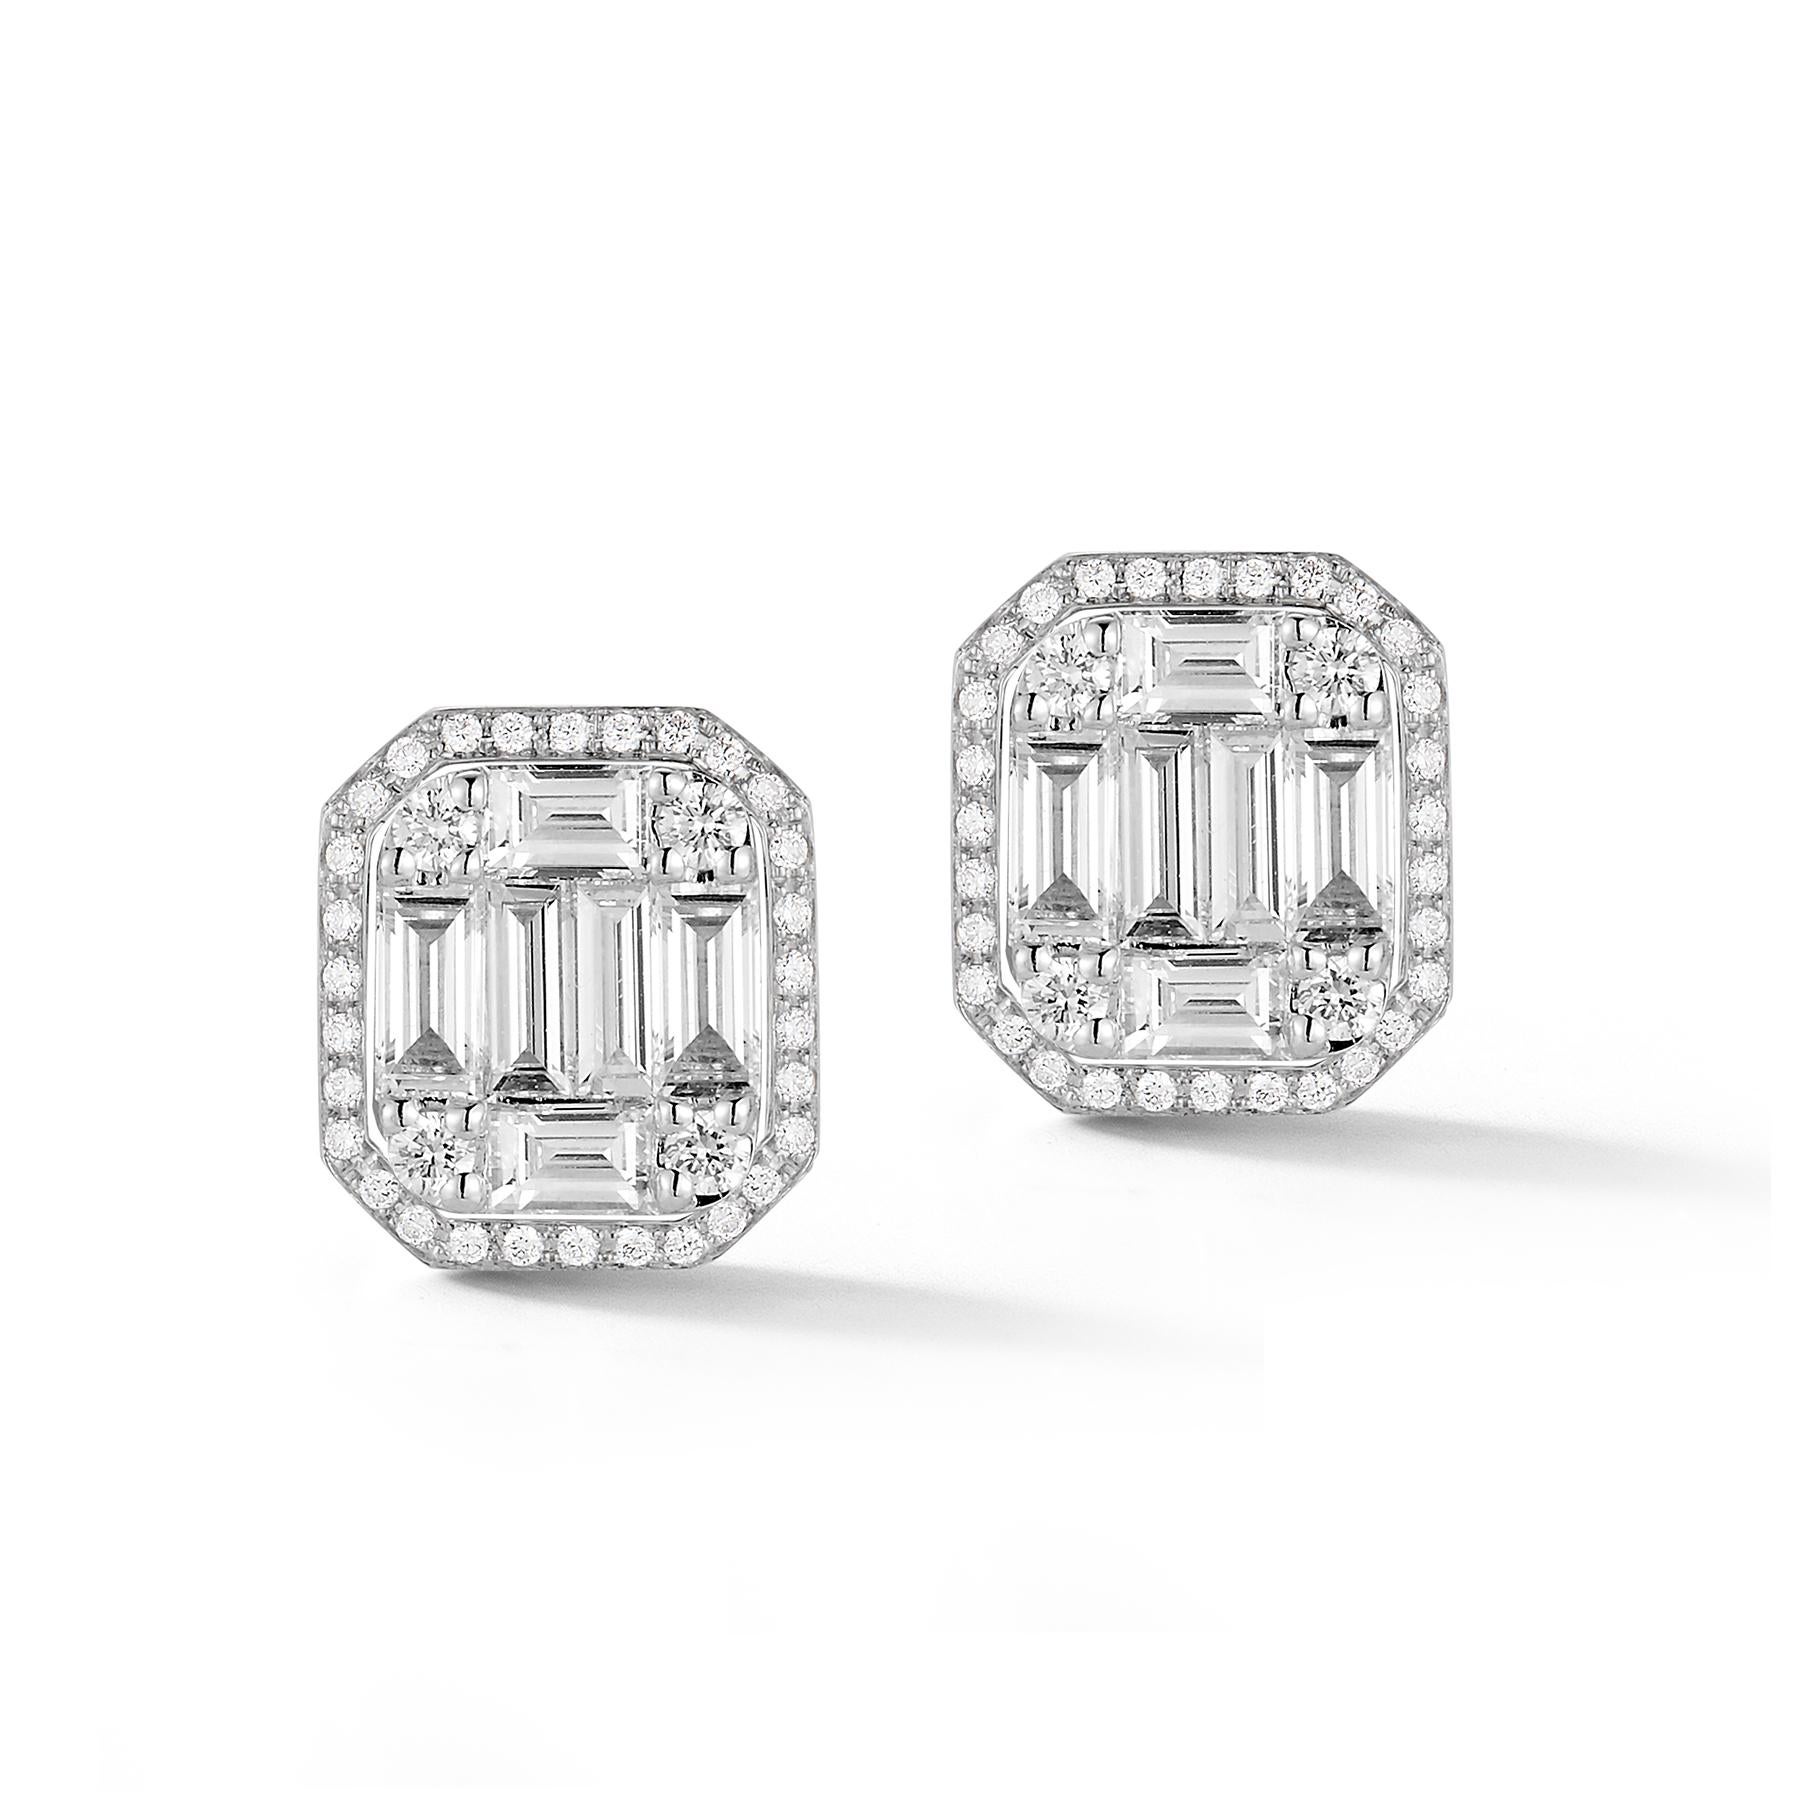 Beautiful 18K White Gold Polygon-Shaped Earrings with 68 round and 12 baguette flawless Diamonds. Total weight 1.40 Carats.